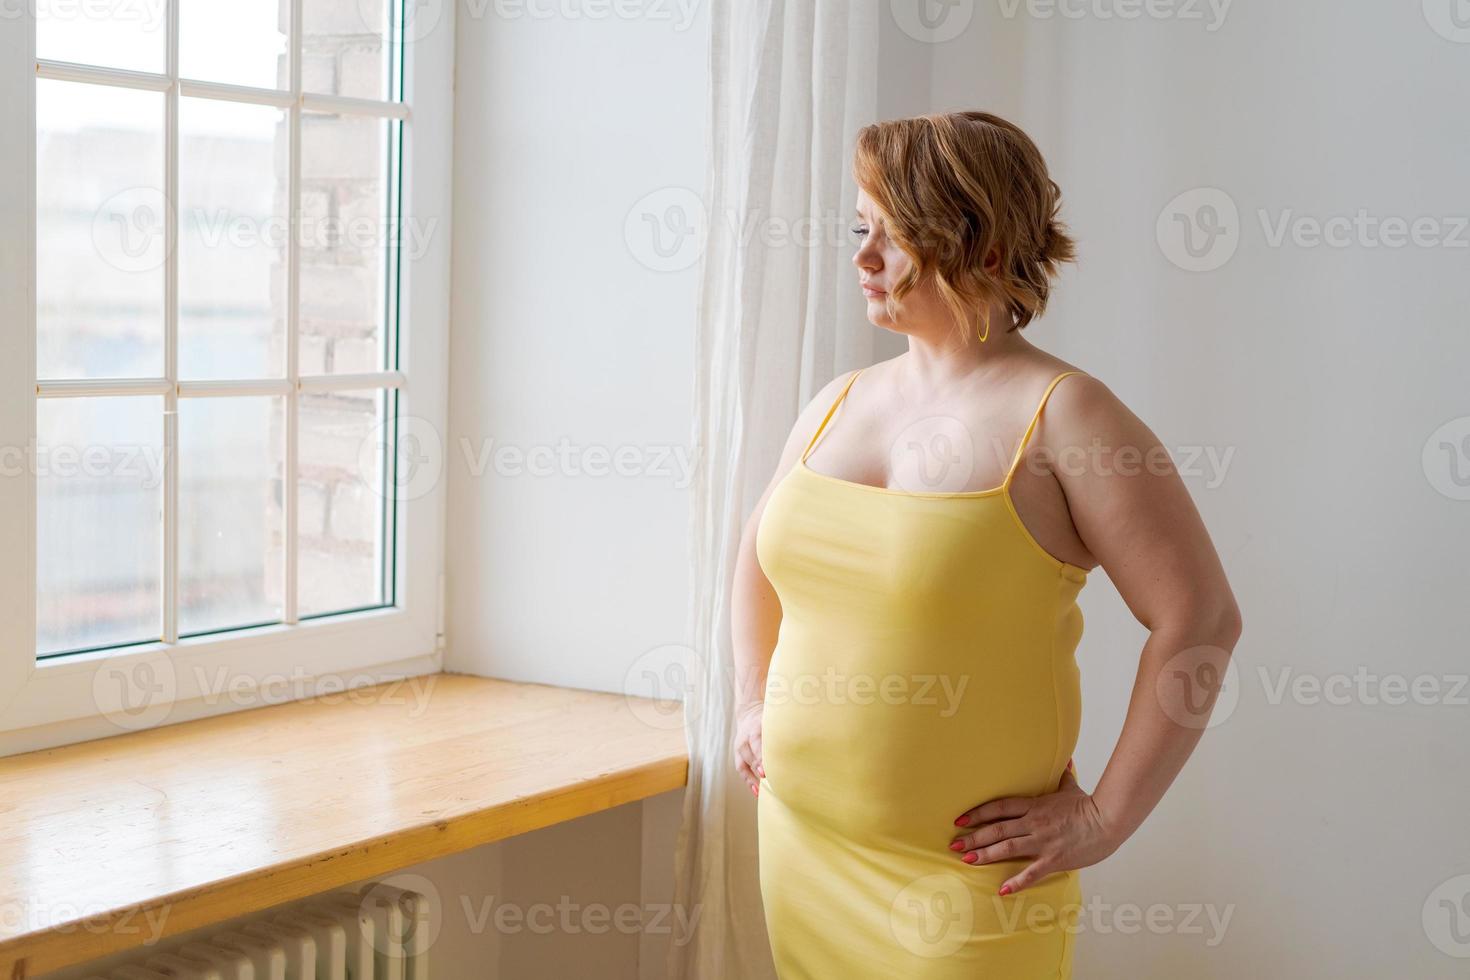 Adult plus size woman in tight-fitting yellow dress, makeup standing by window photo